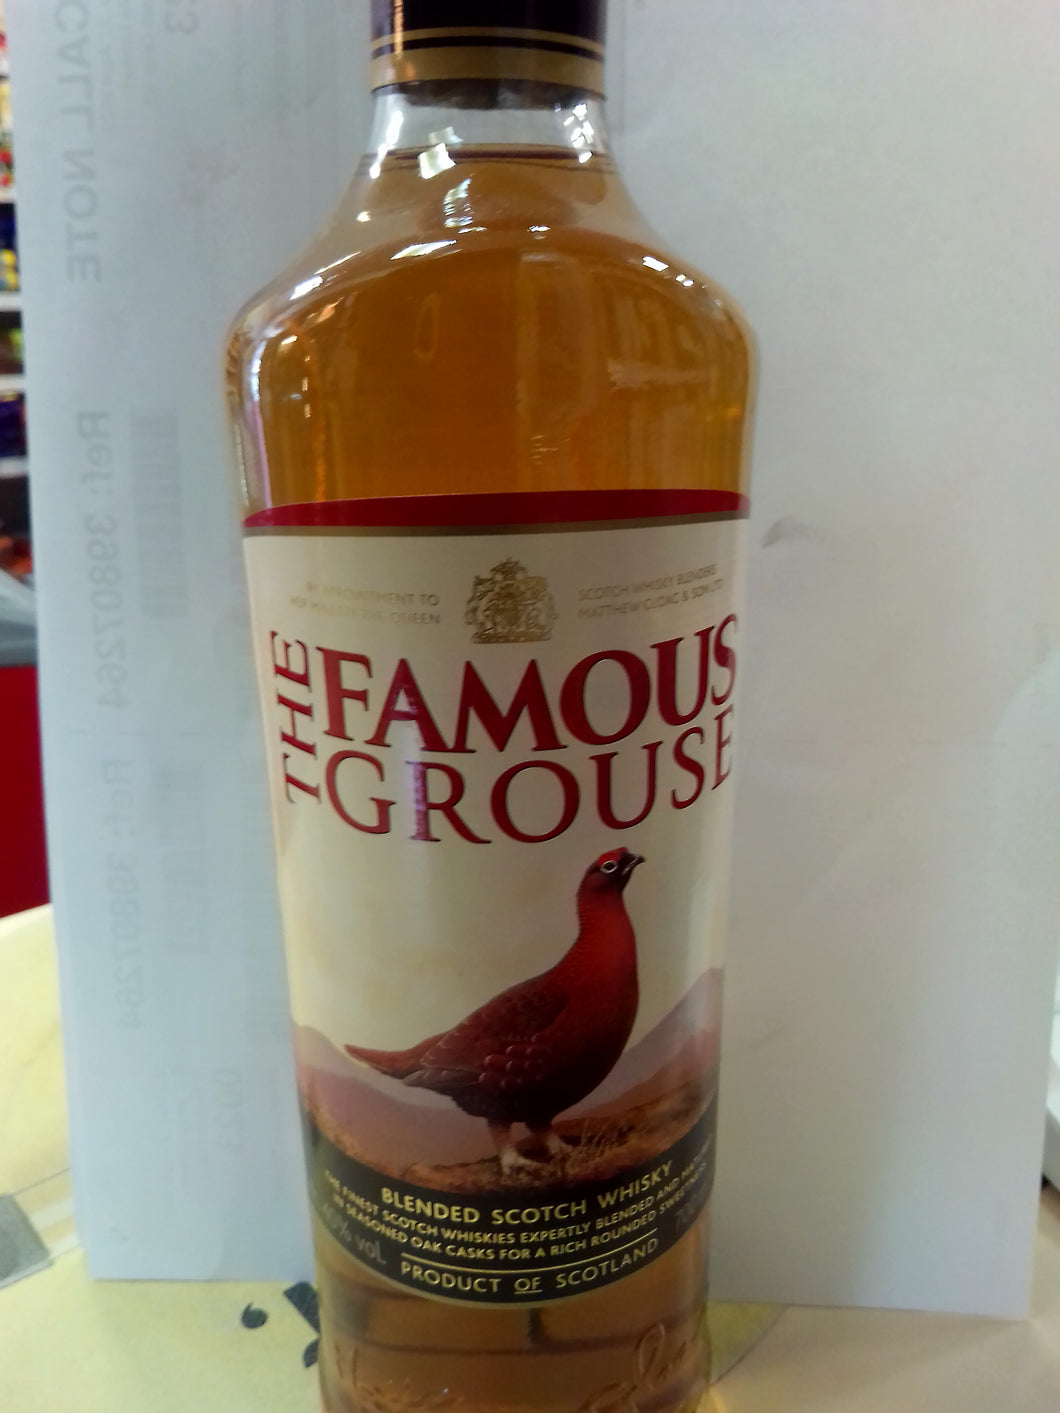 The famous grouse 70cl